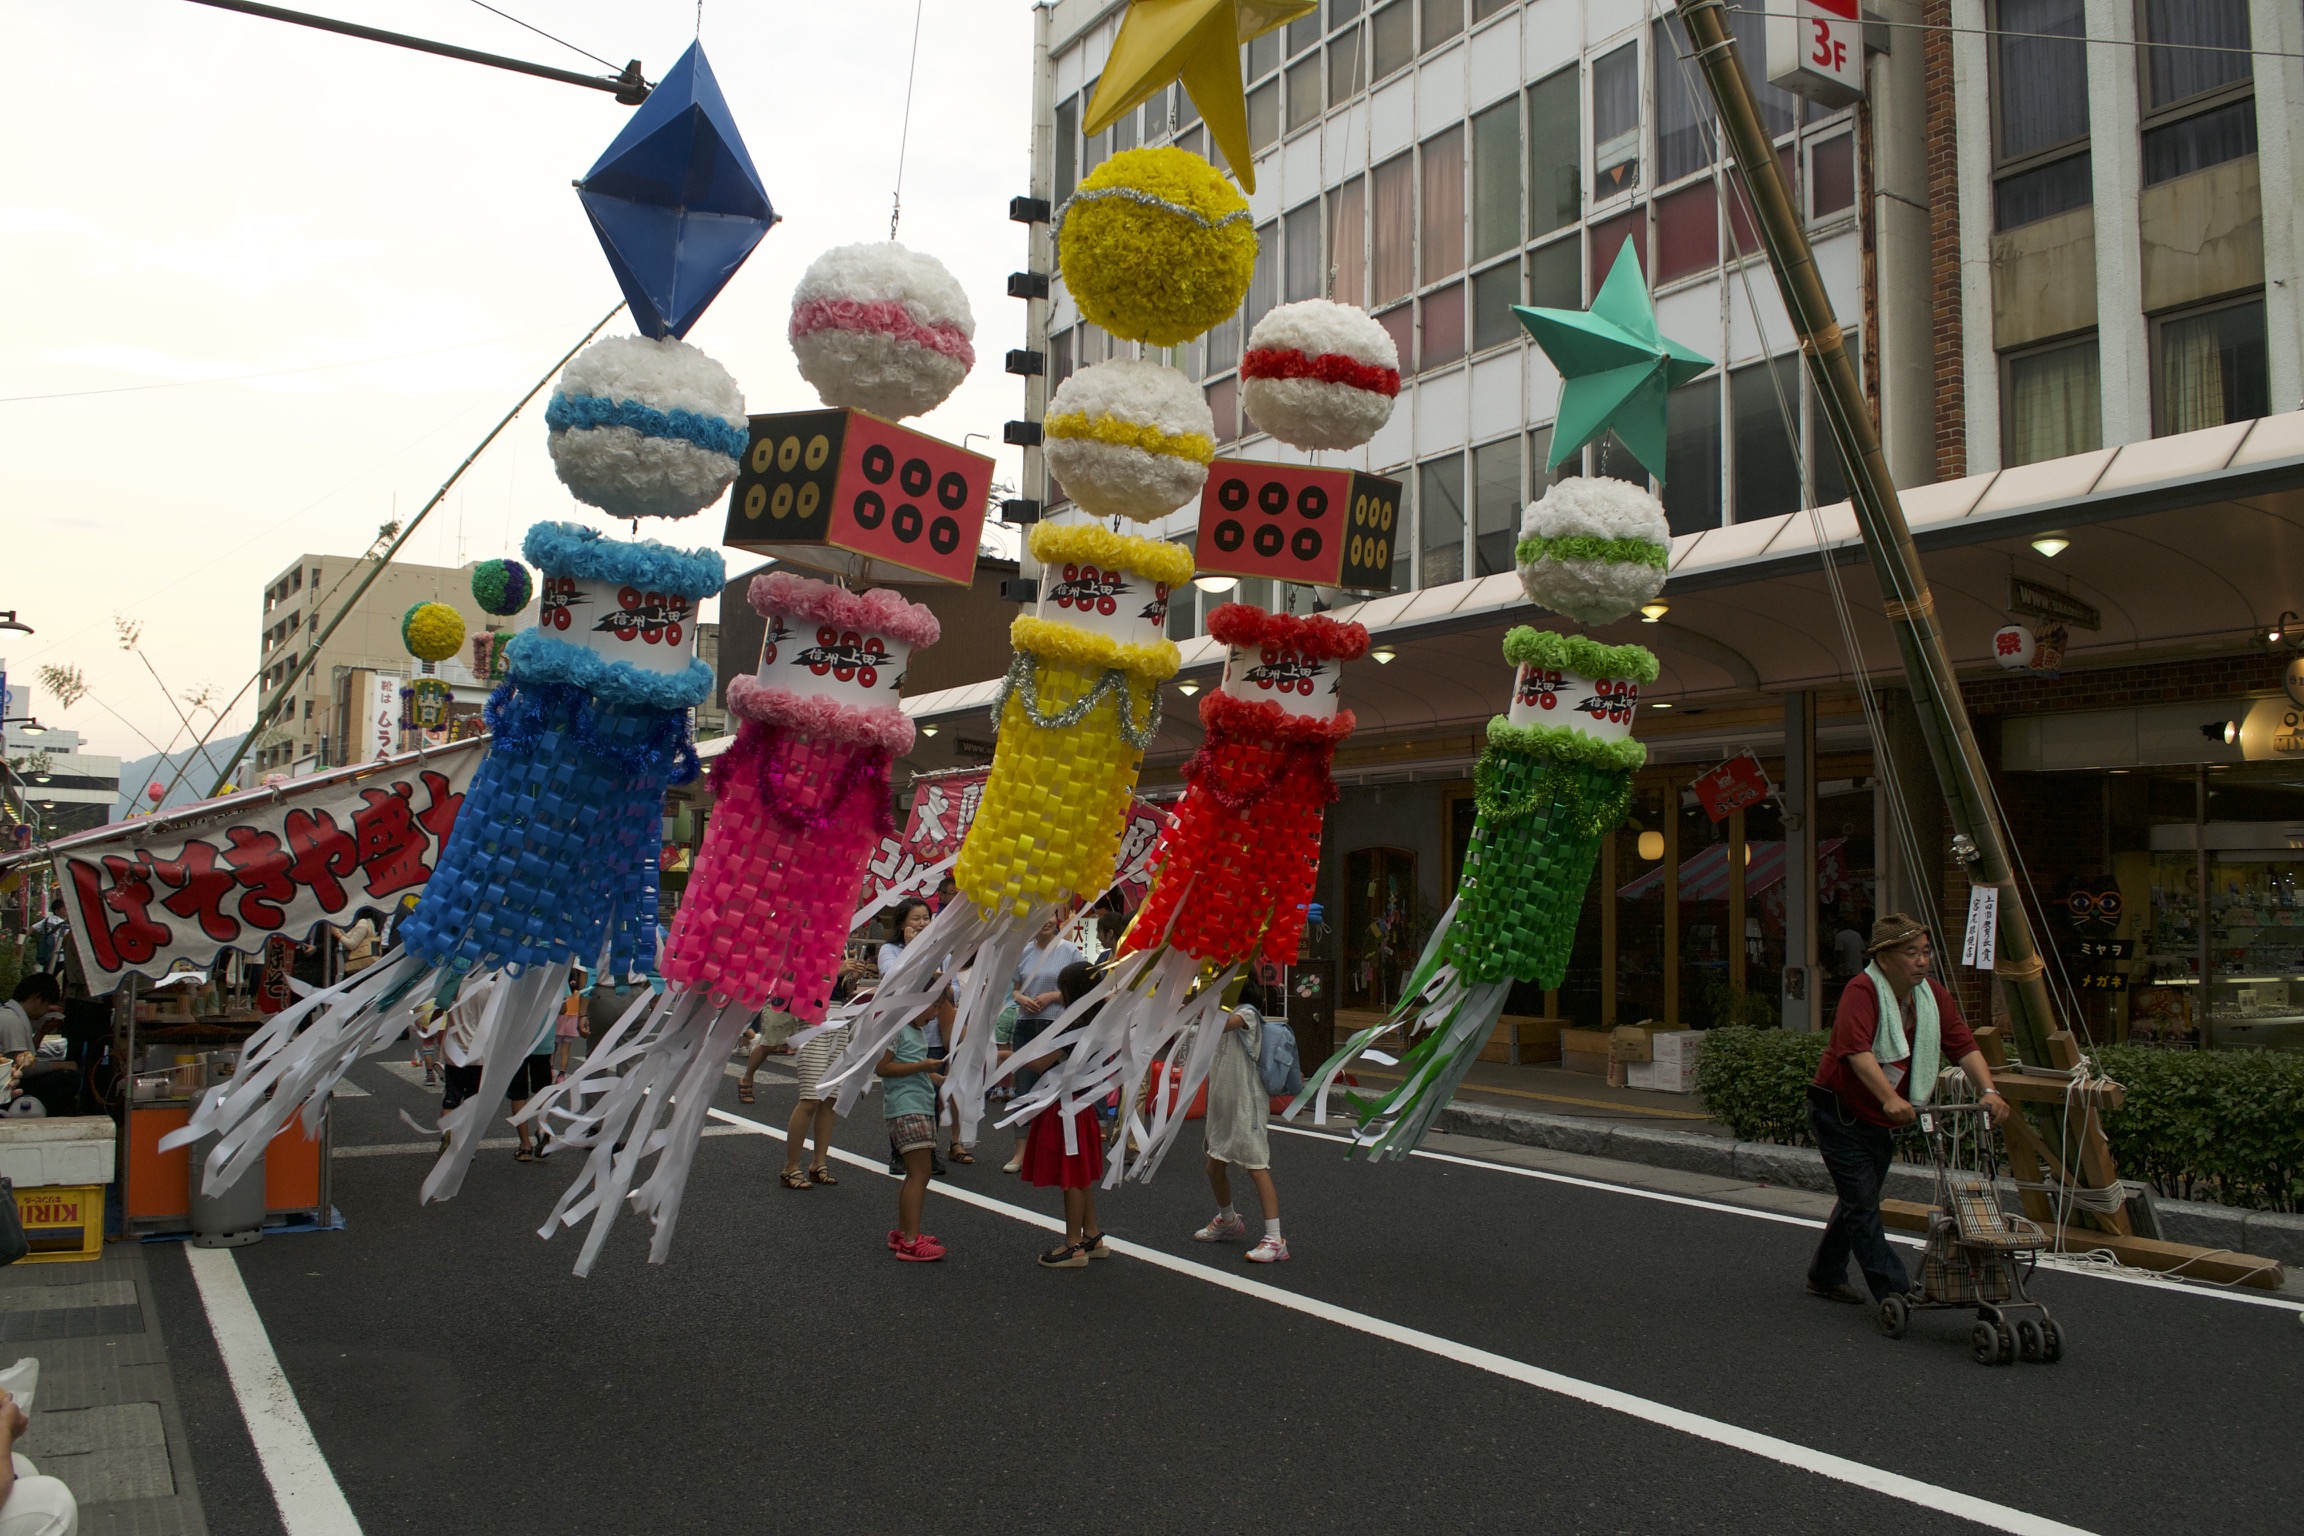 Five large, brightly-colored piñata-like objects hang in the middle of a street.